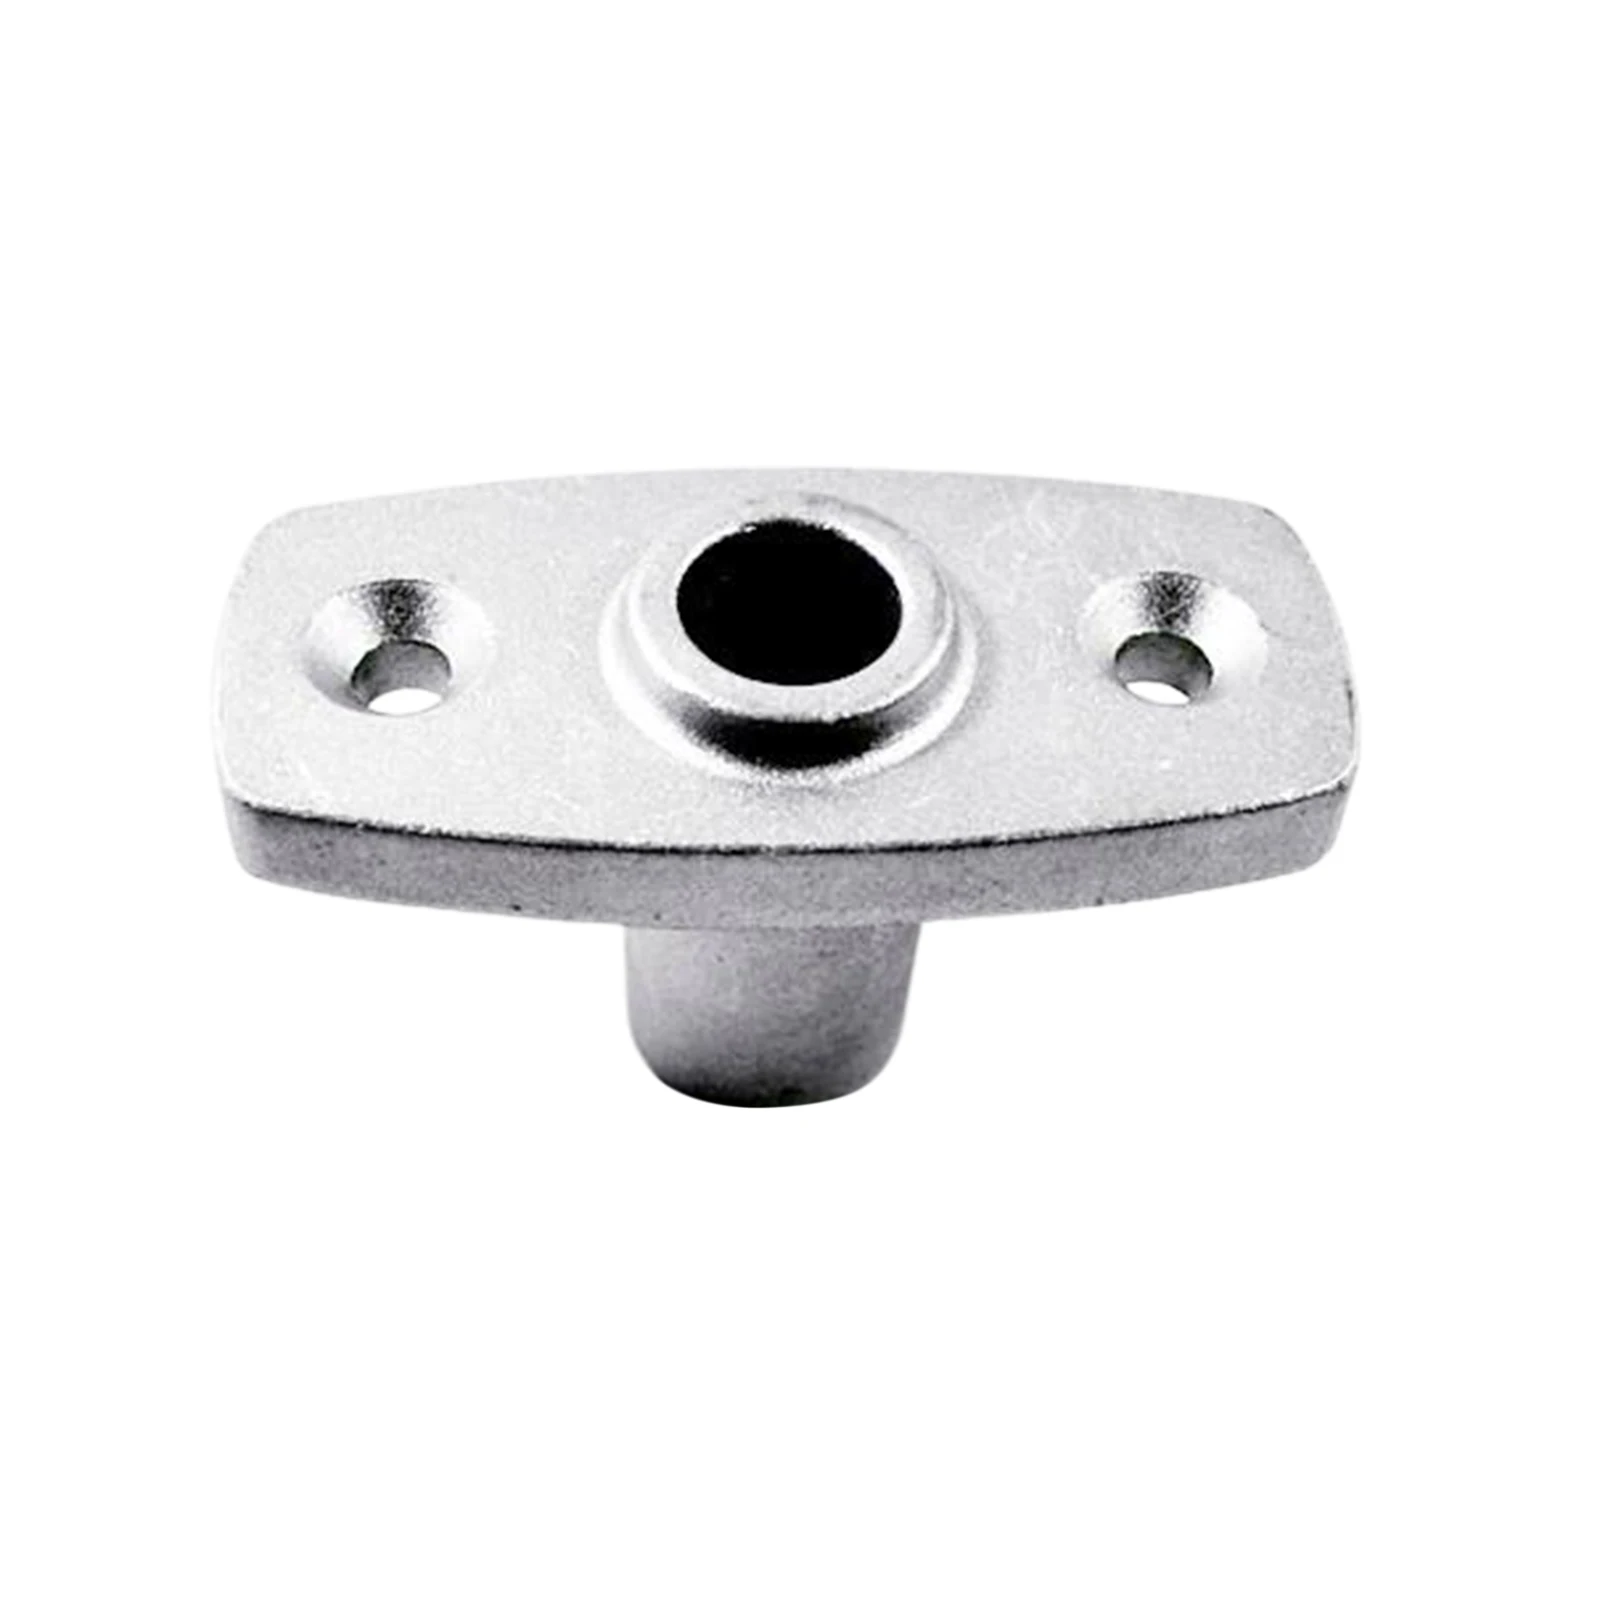 Boat Parts Accessories Oarlock /Rowlock Socket , 316 Stainless Steel, Easy to Replace